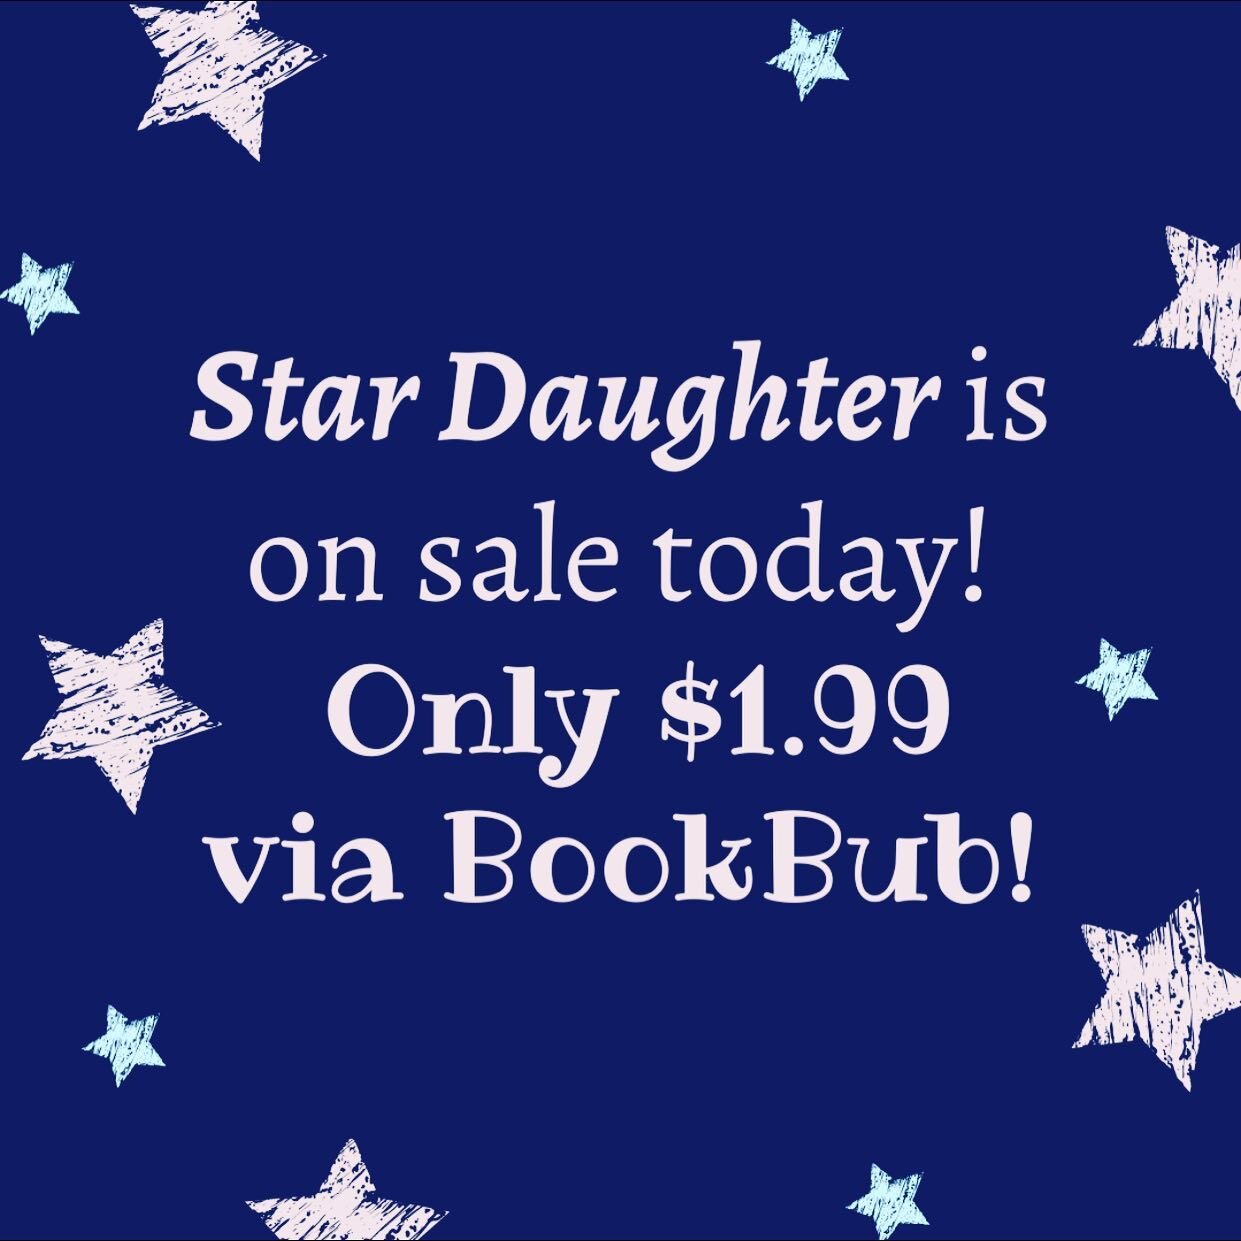 Have you been looking for an excuse to be swept away to the starry court? Well, here&rsquo;s one: the e-book of the Andre Norton Nebula Award finalist STAR DAUGHTER is only $1.99 through BookBub! (The link is in my bio.) ✨✨✨✨✨